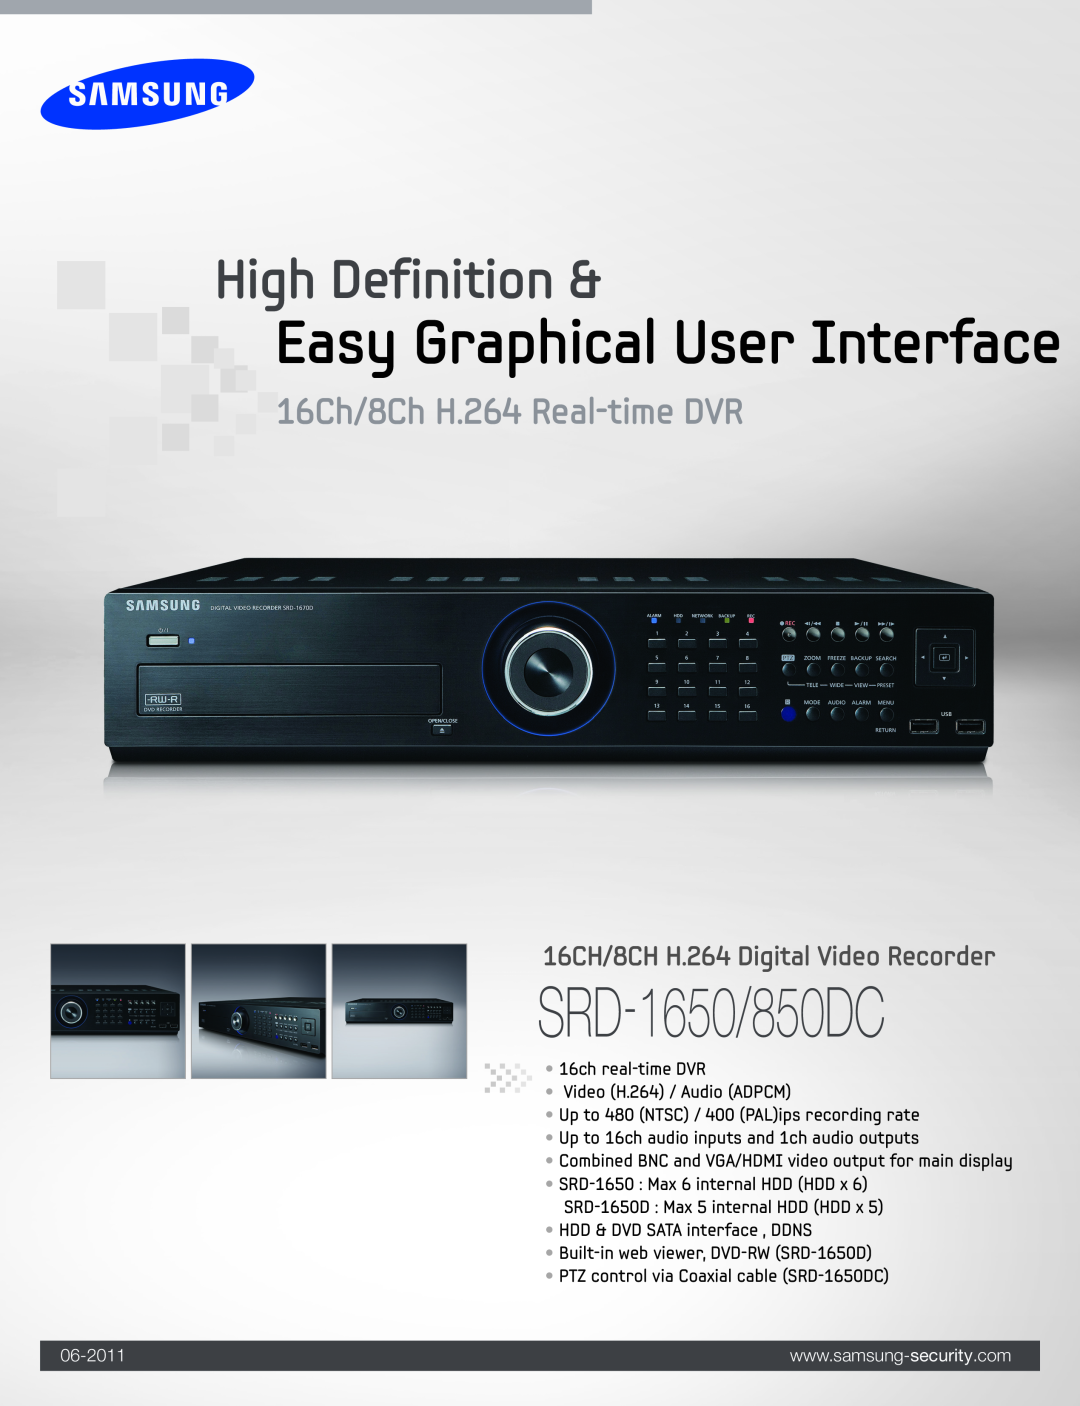 Samsung manual SRD-1650/850DC, Easy Graphical User Interface, High Definition, 16Ch/8Ch H.264 Real-time DVR, 06-2011 